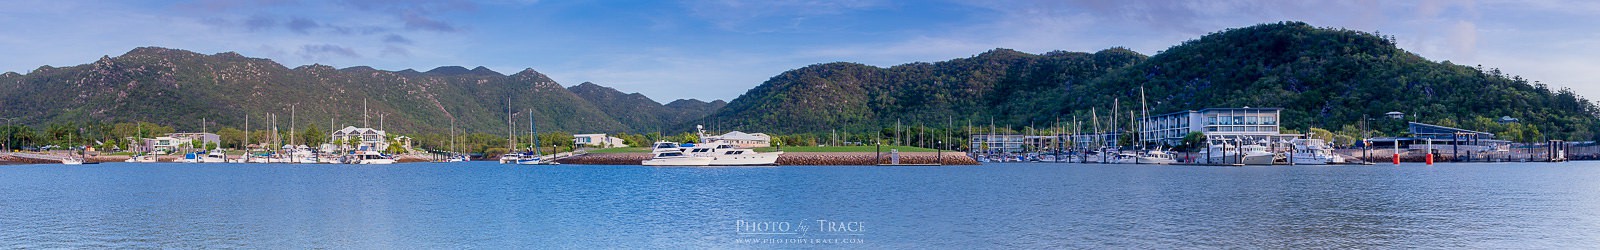 Nelly Bay Marina on Magnetic Island